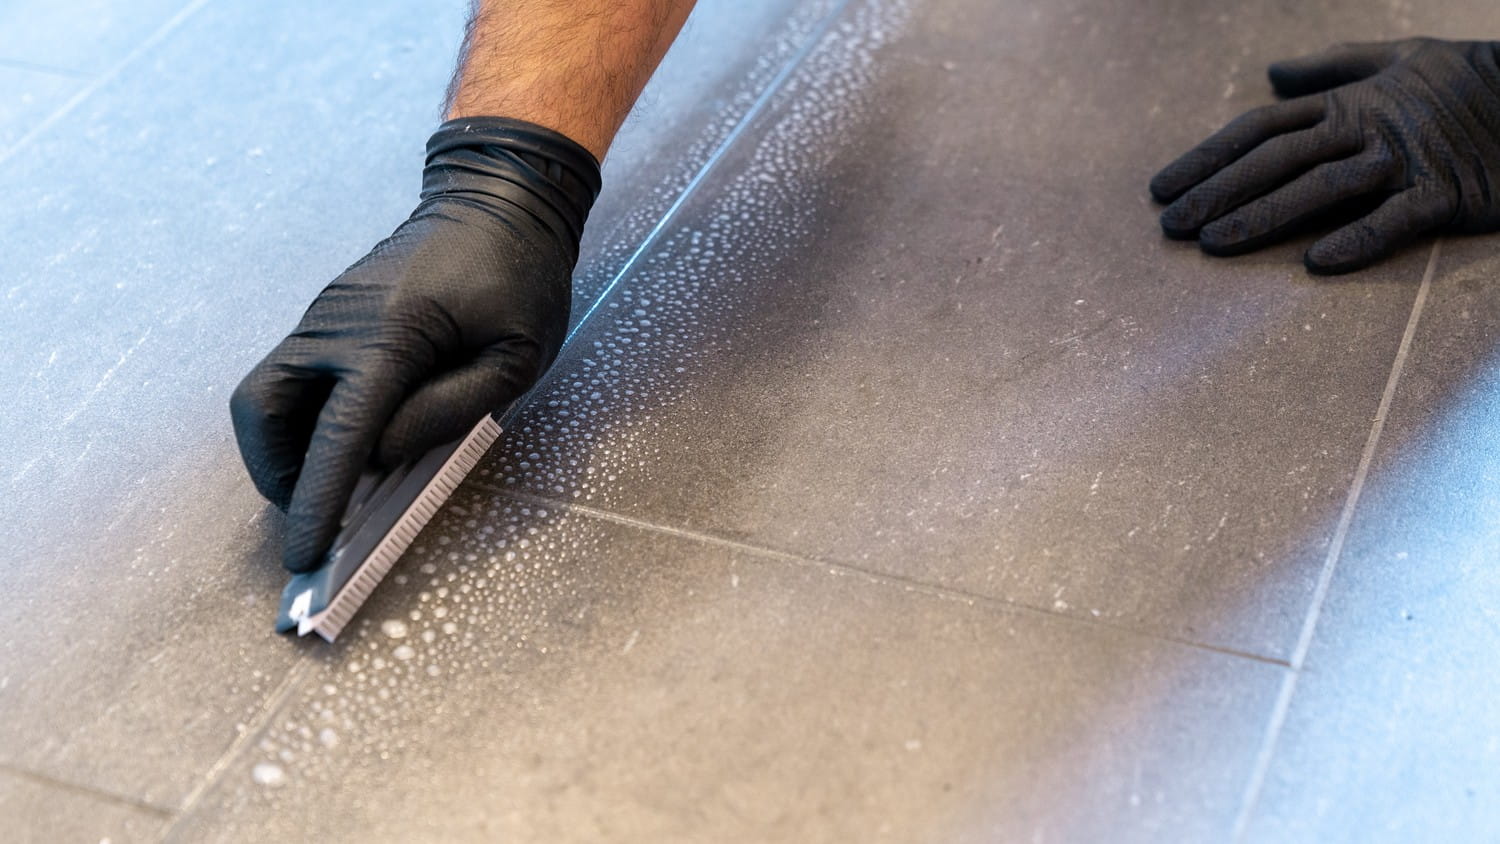 A close-up view of a person's hand holding a scrub brush and cleaning a dirty tile floor.